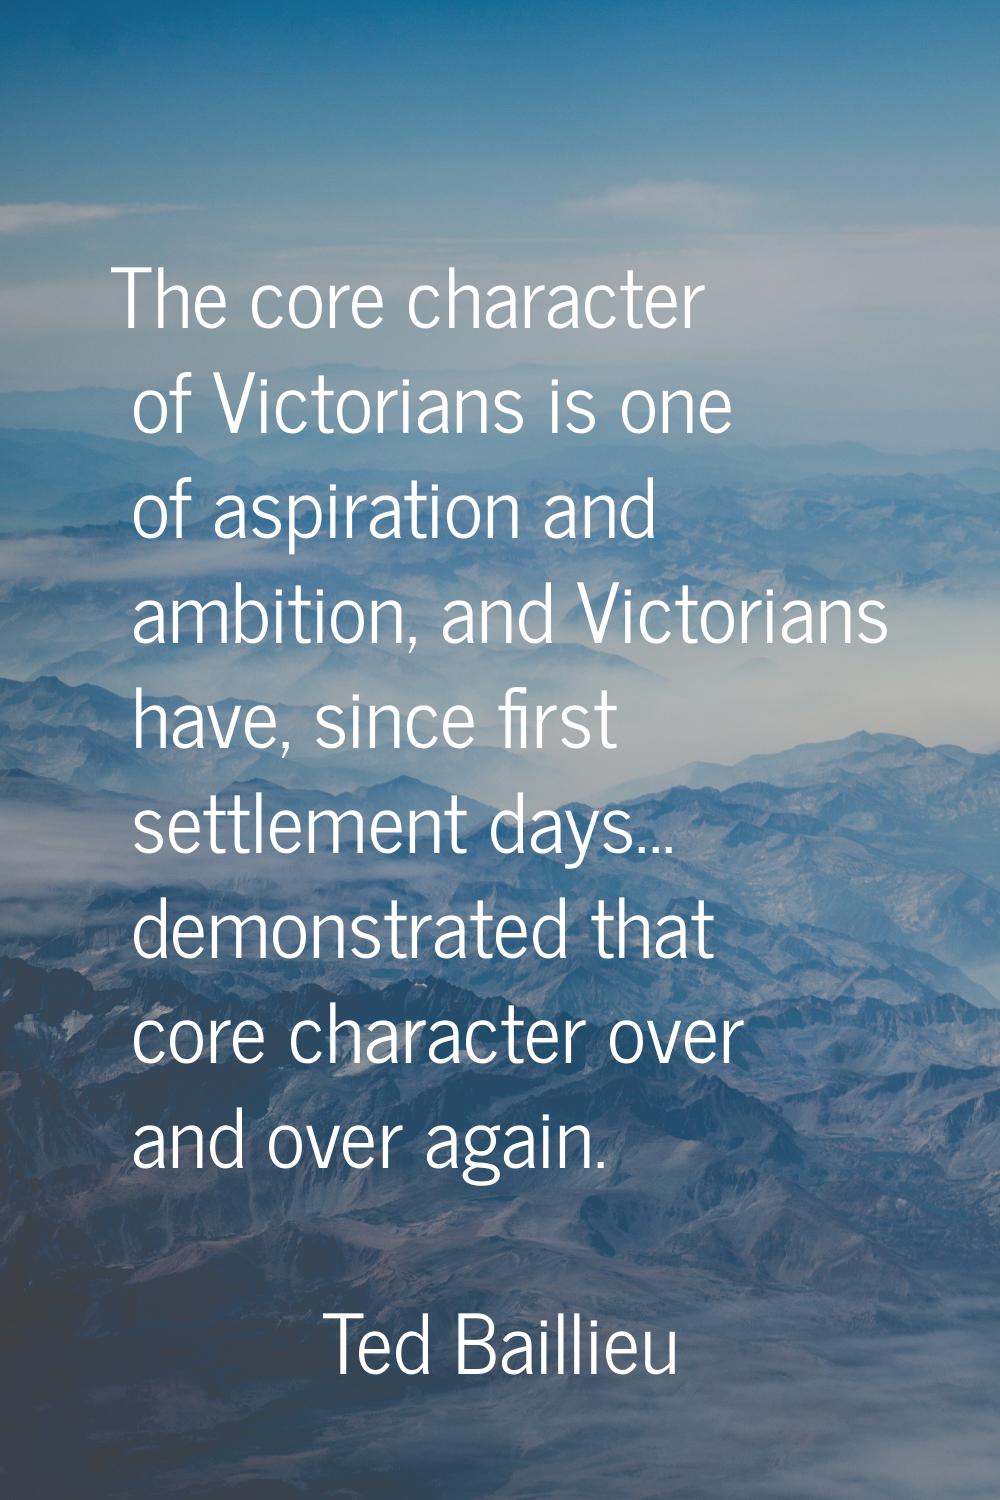 The core character of Victorians is one of aspiration and ambition, and Victorians have, since firs